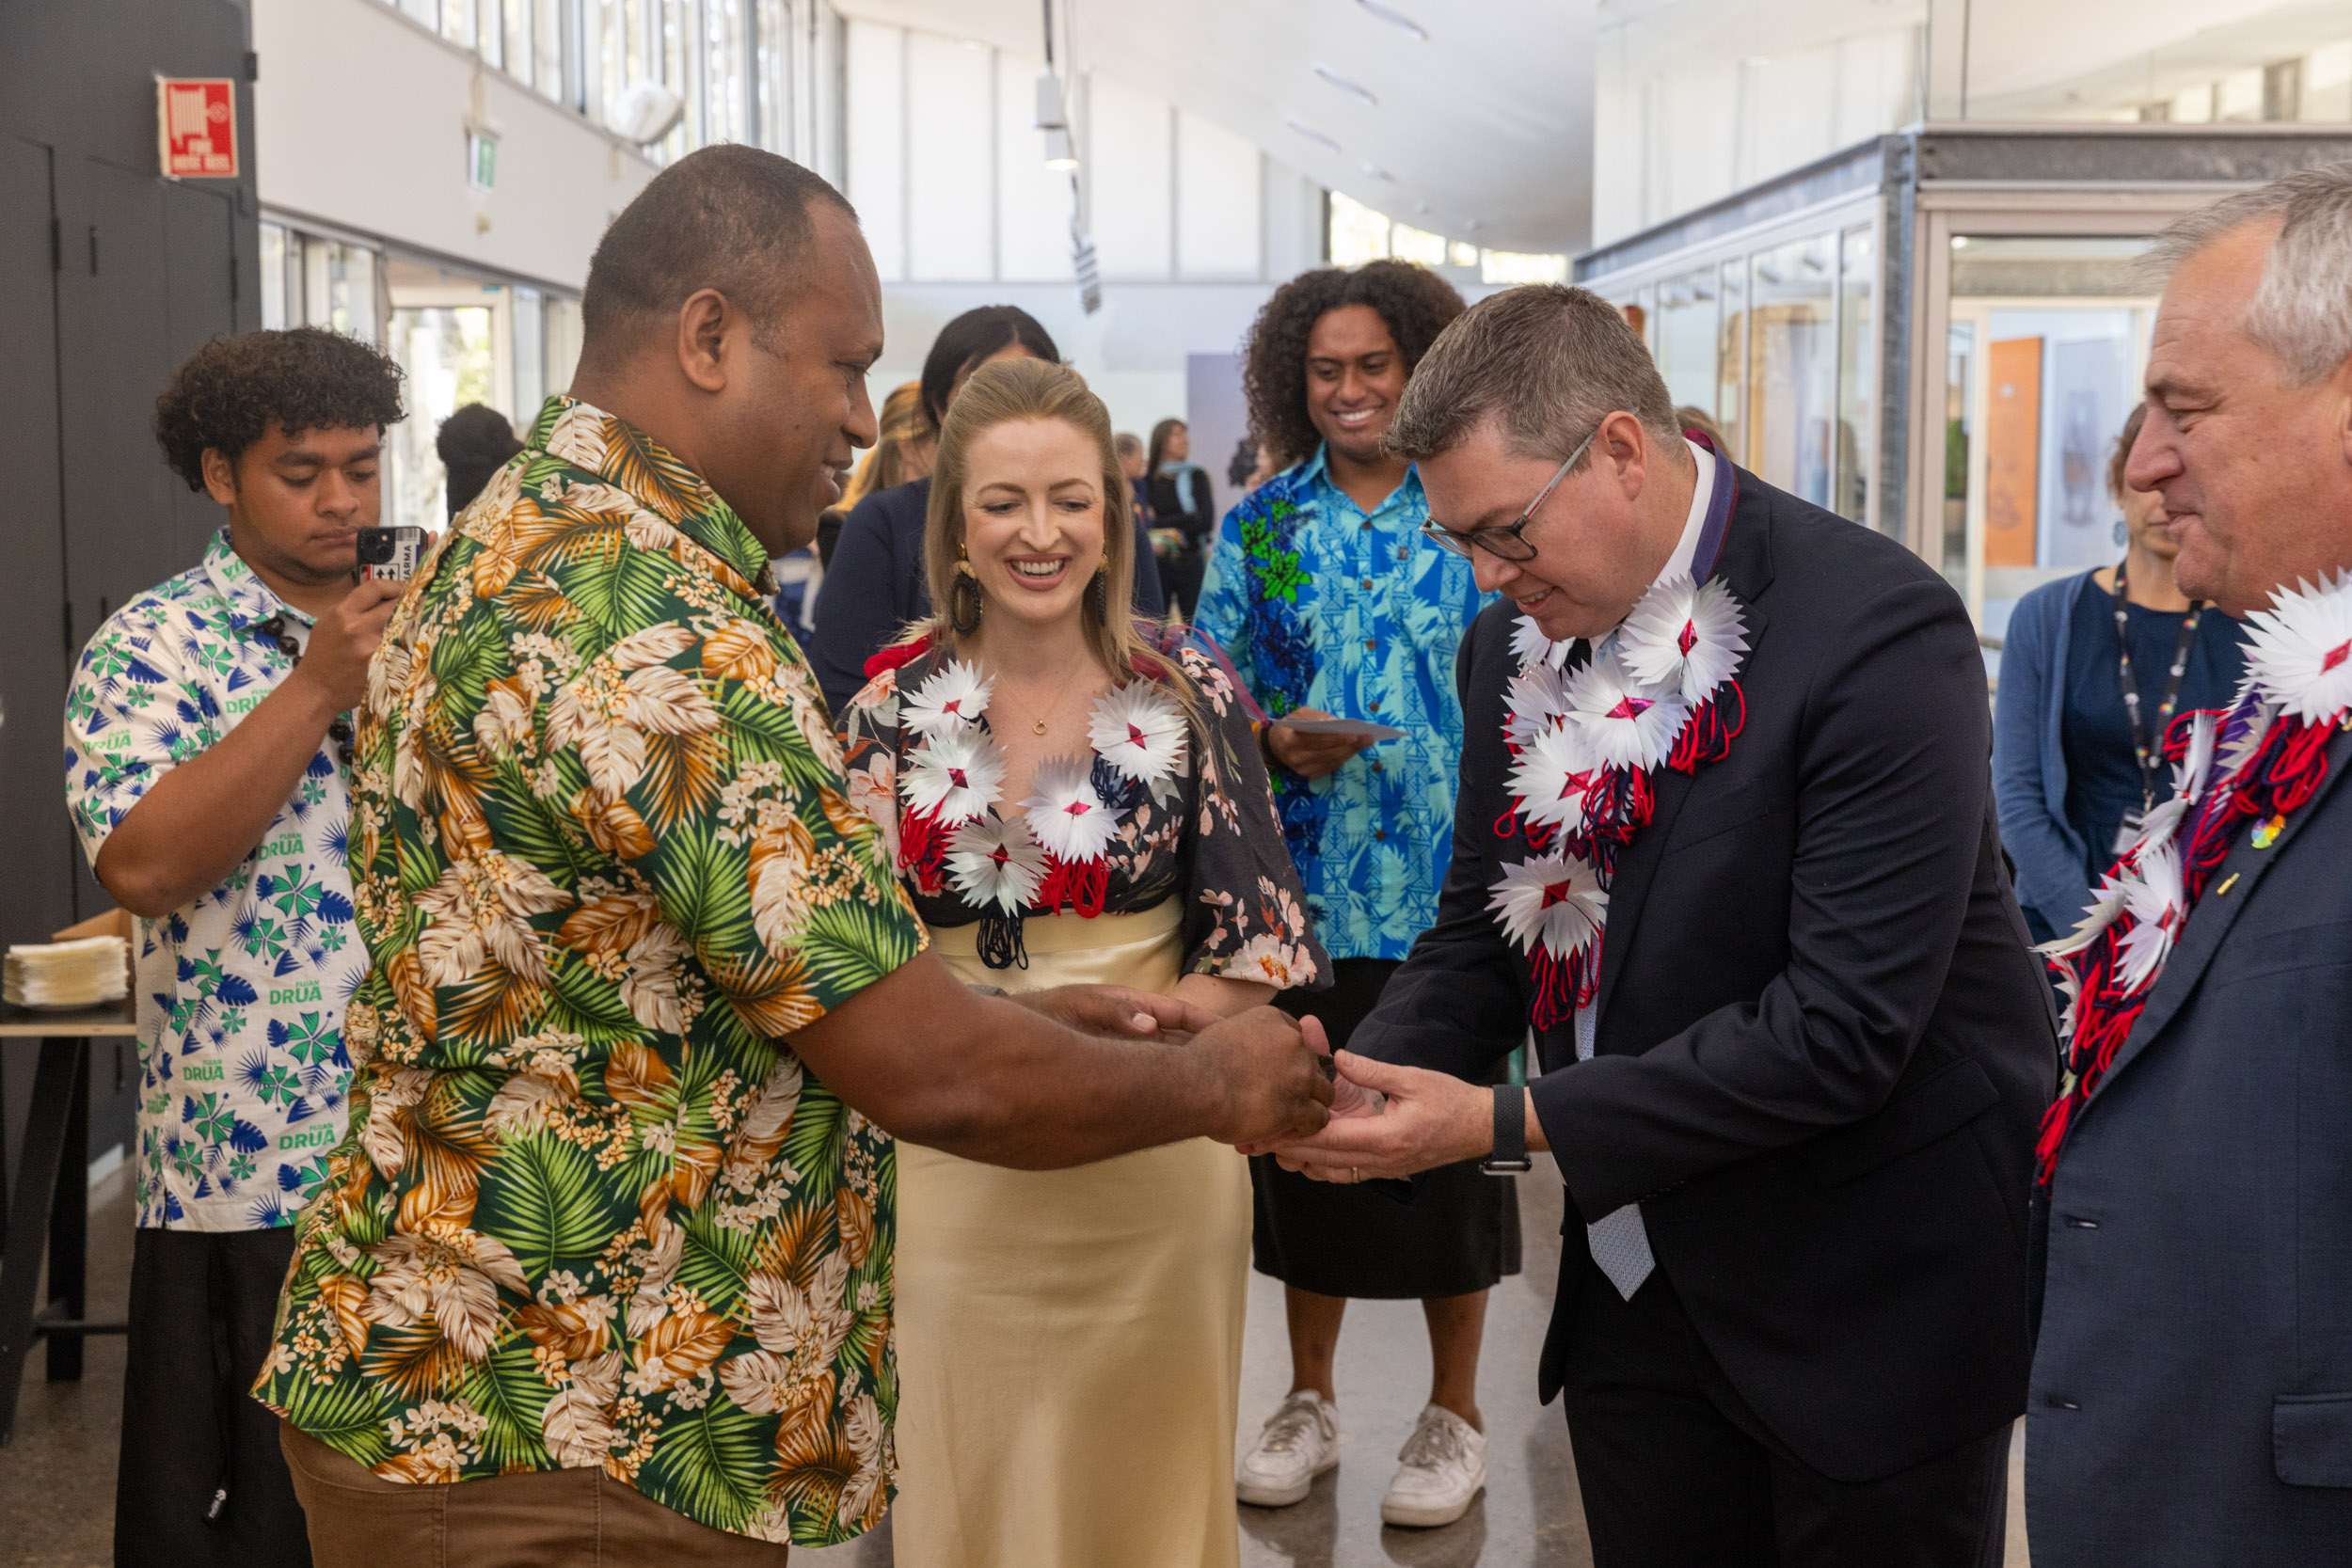 A man wearing a green floral Pacific shirt hands another man wearing a suit a flower lei. A woman with a lei stands in the middle and two men can be seen in the background taking photos